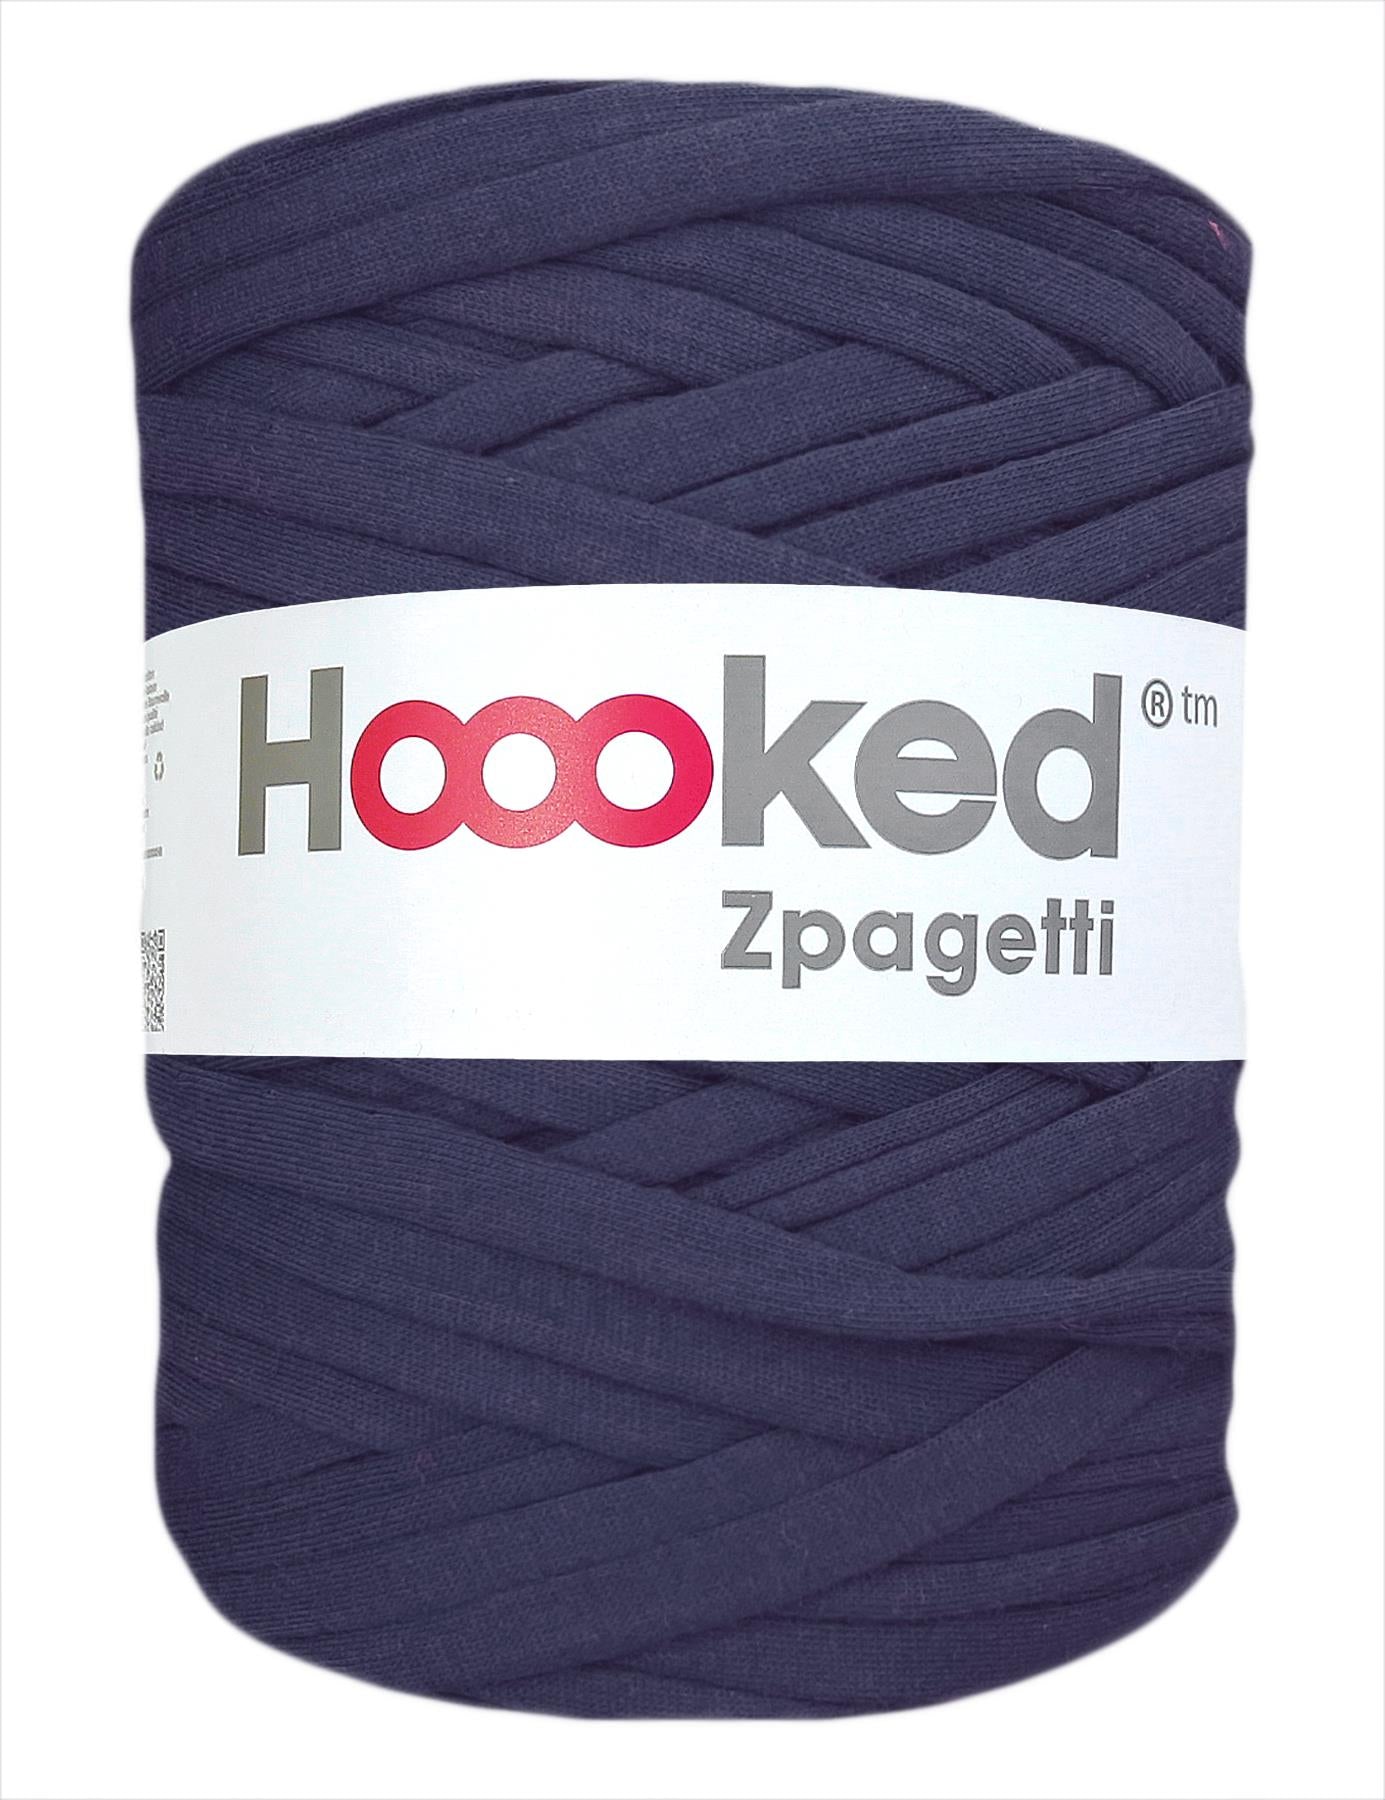 Muted berry blue t-shirt yarn by Hoooked Zpagetti (100-120m)